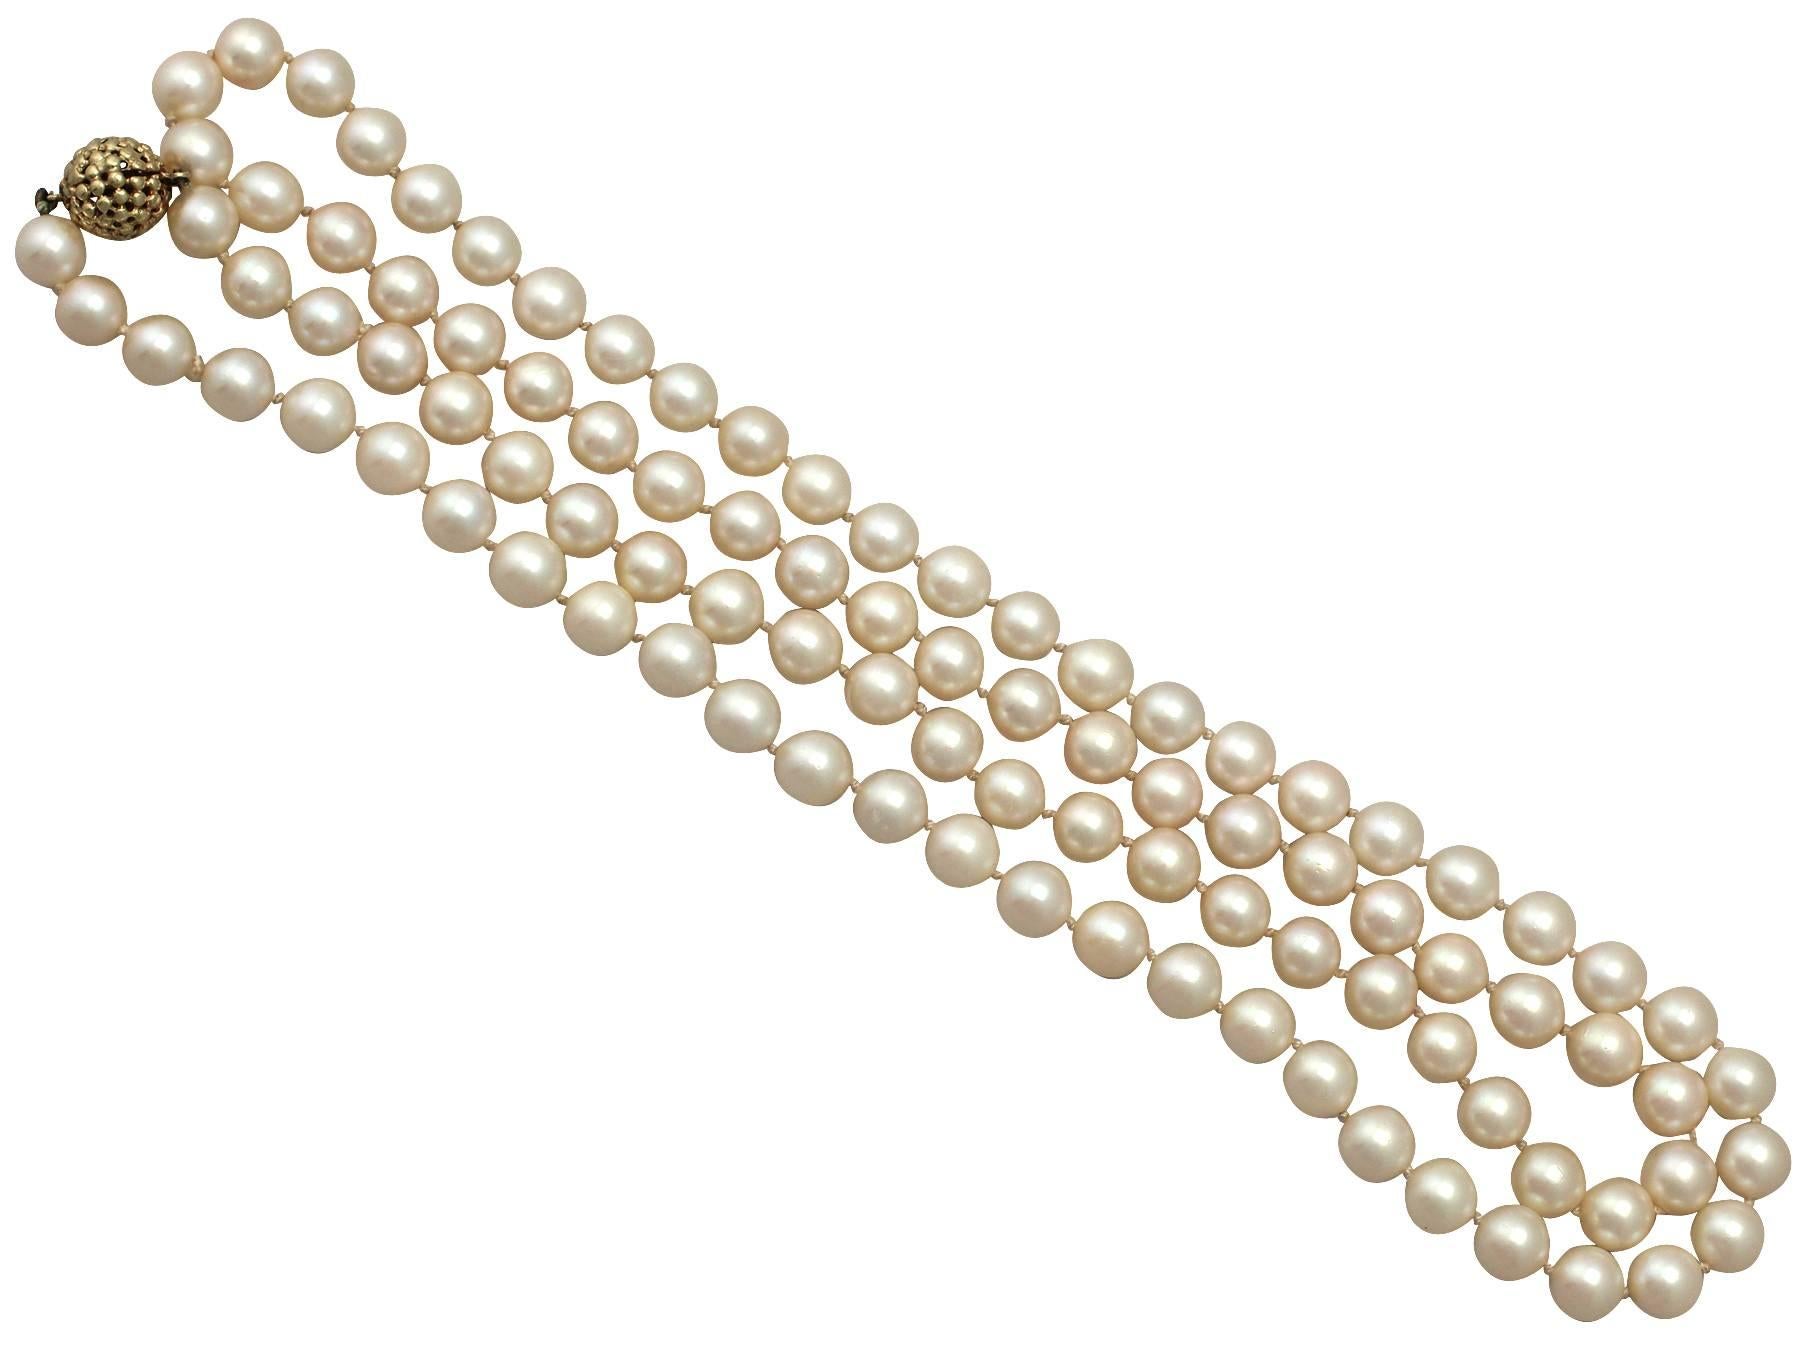 A fine and impressive single strand cultured Japanese Akoya pearl necklace with a feature 14 karat yellow gold clasp; part of our diverse necklace collection

This fine and impressive vintage pearl necklace consists of ninety-six individually